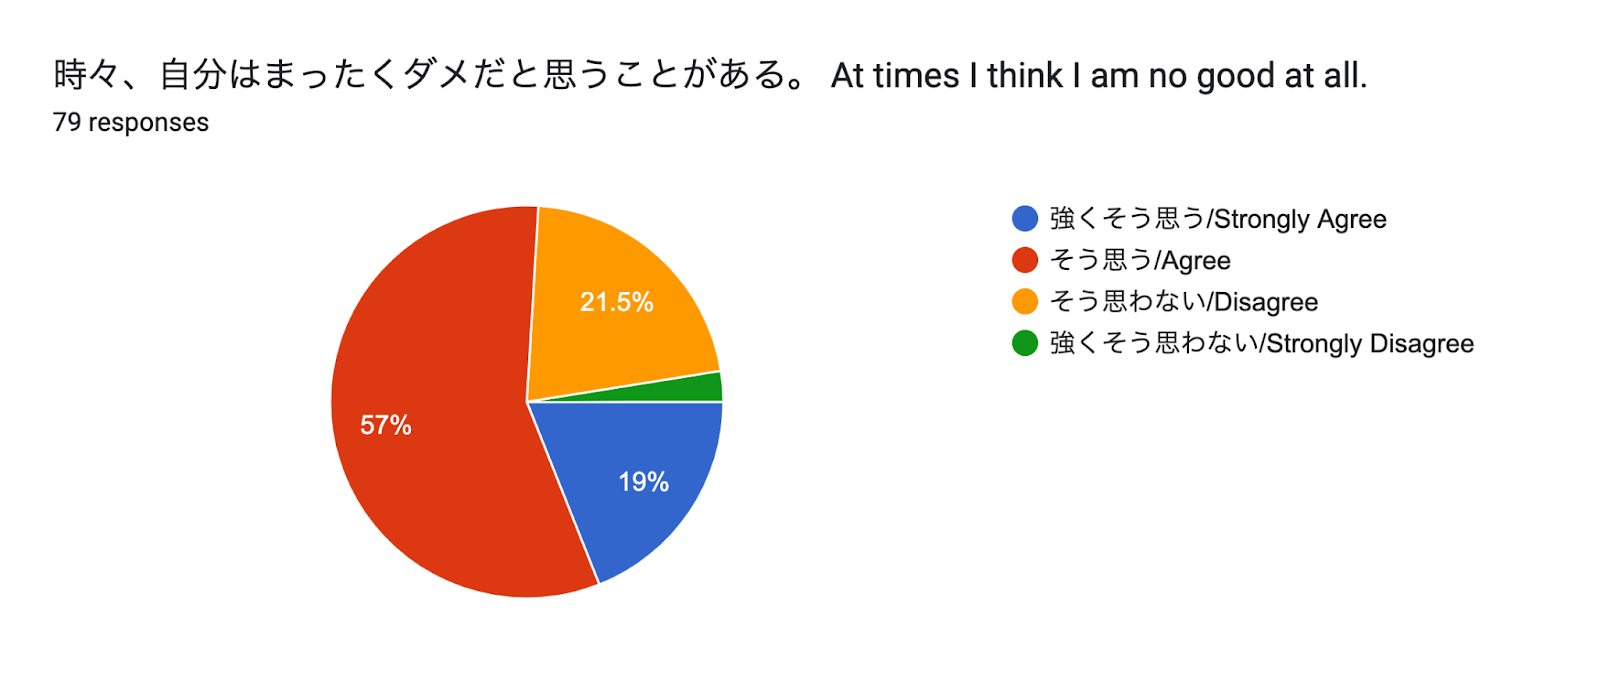 Forms response chart. Question title: 時々、自分はまったくダメだと思うことがある。
At times I think I am no good at all.
. Number of responses: 79 responses.